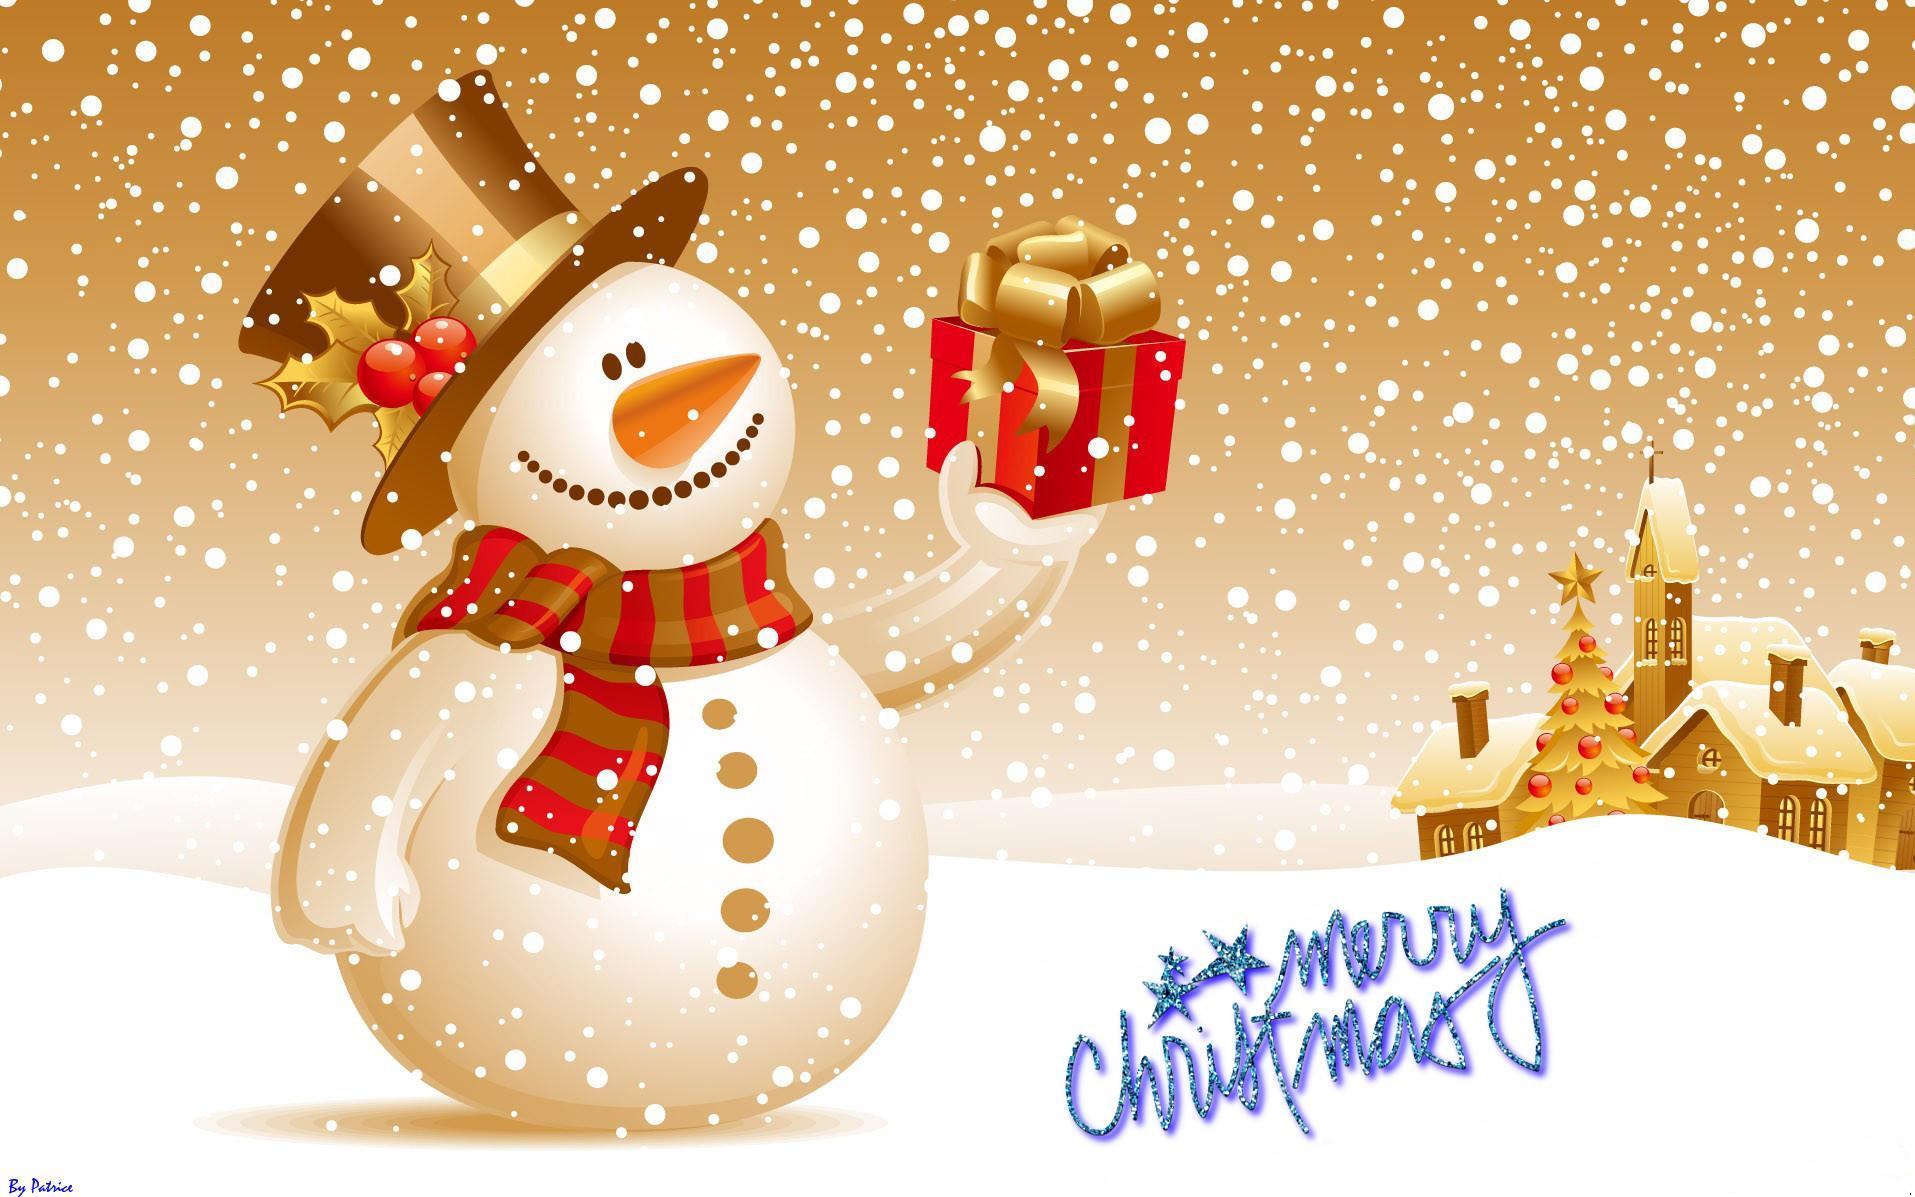 Free download Cute Snowman Merry Christmas Image Wallpaper